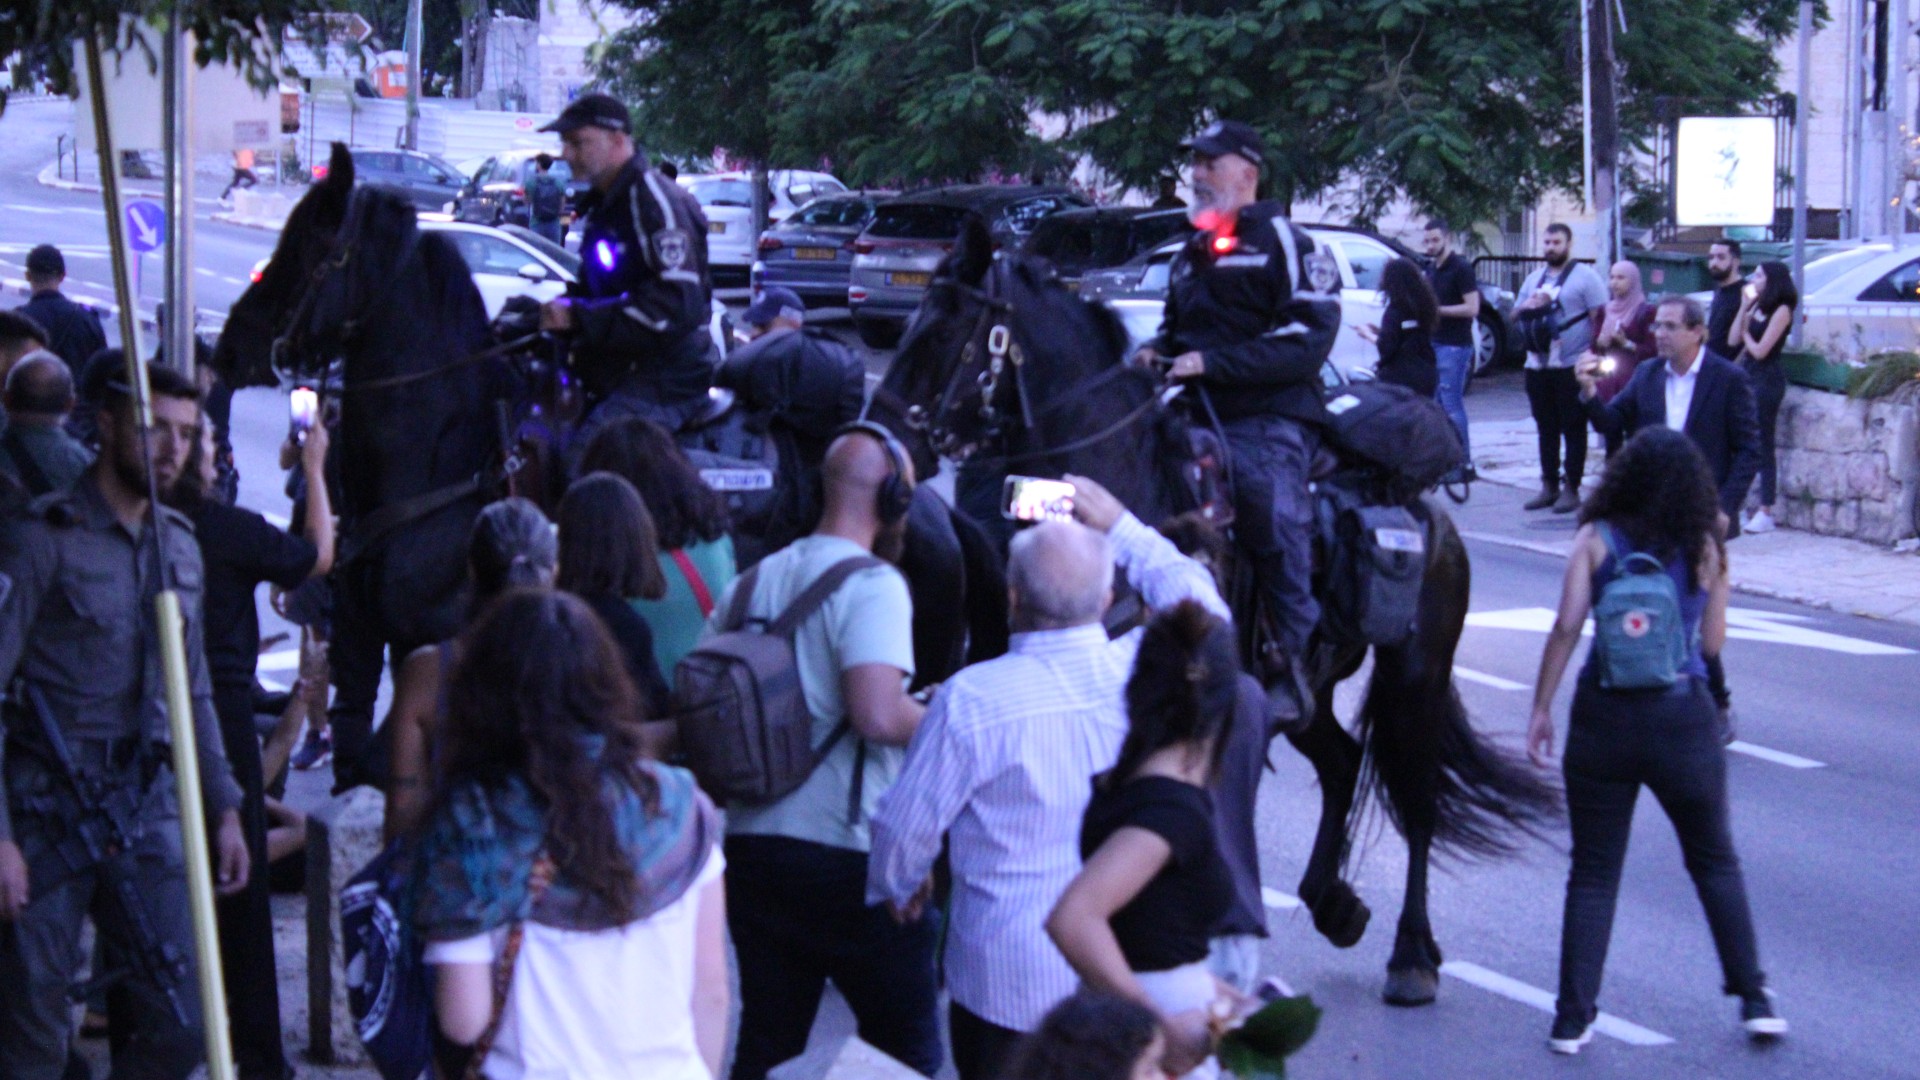 Mounted police confront protesters in Haifa (MEE/Vera Sajrawi)